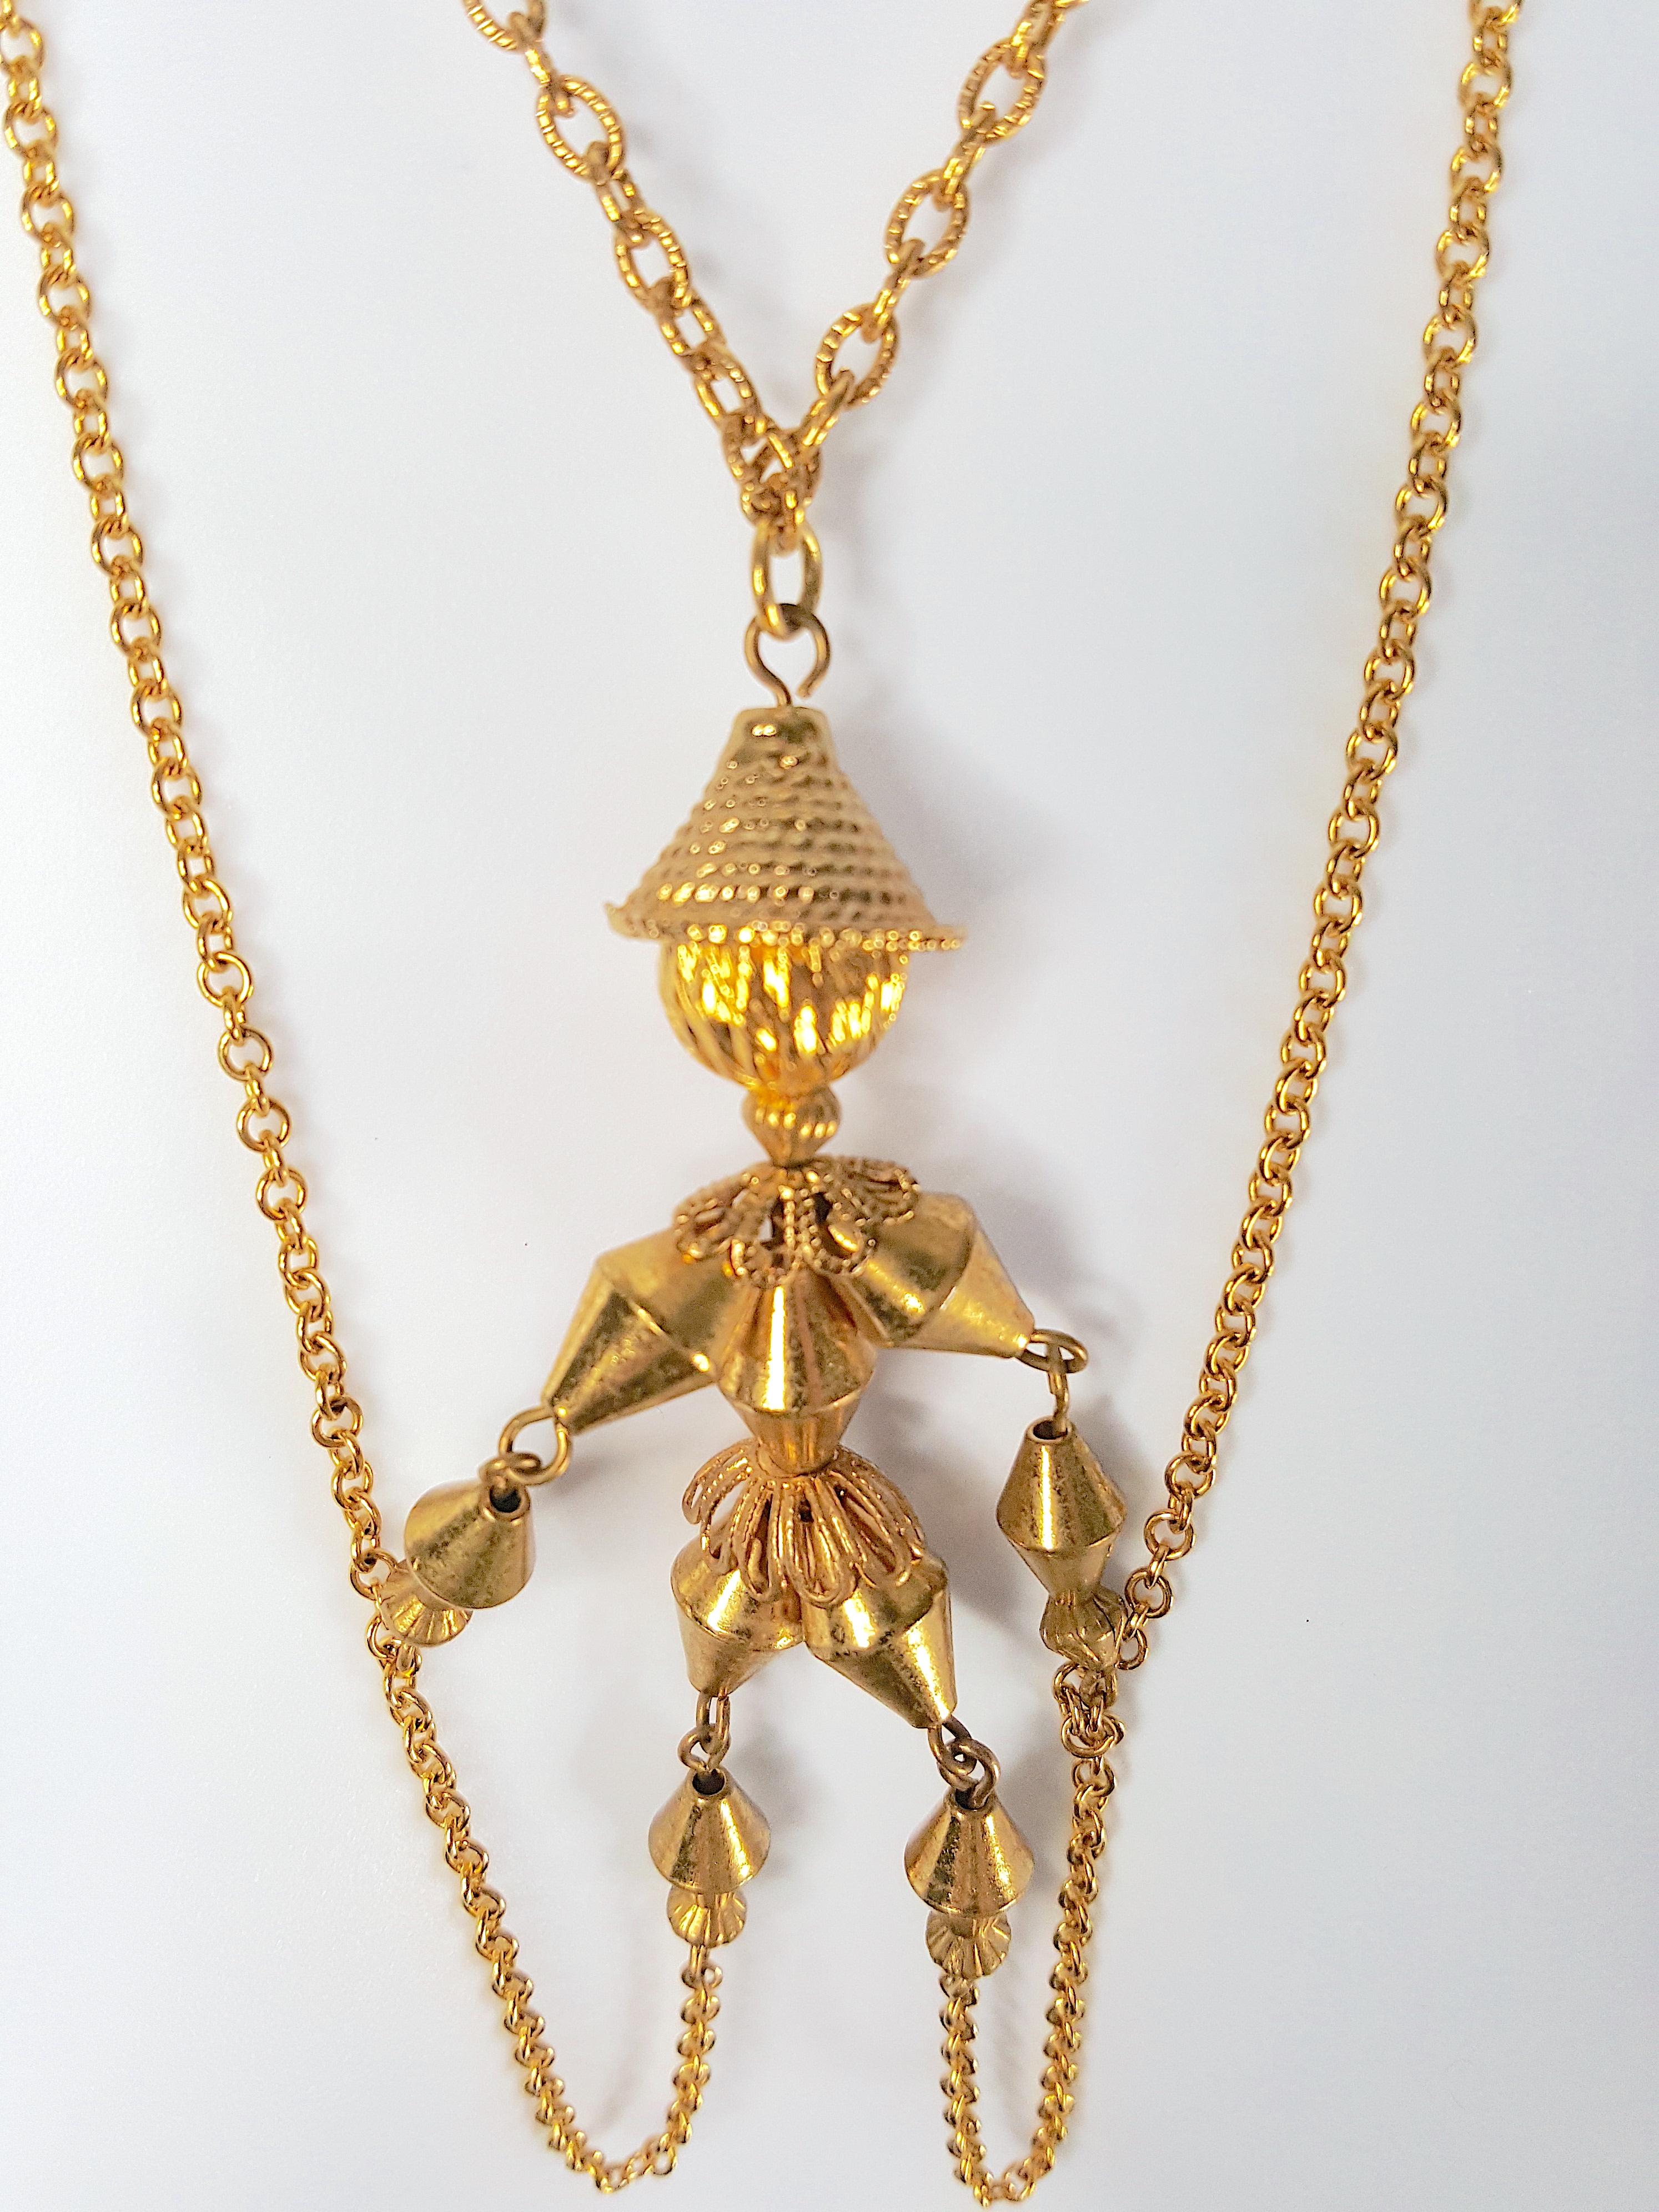 KineticPuppetStringsPinocchio GoldTexturedChainLink3Strand Early20thC. Necklace In Good Condition For Sale In Chicago, IL